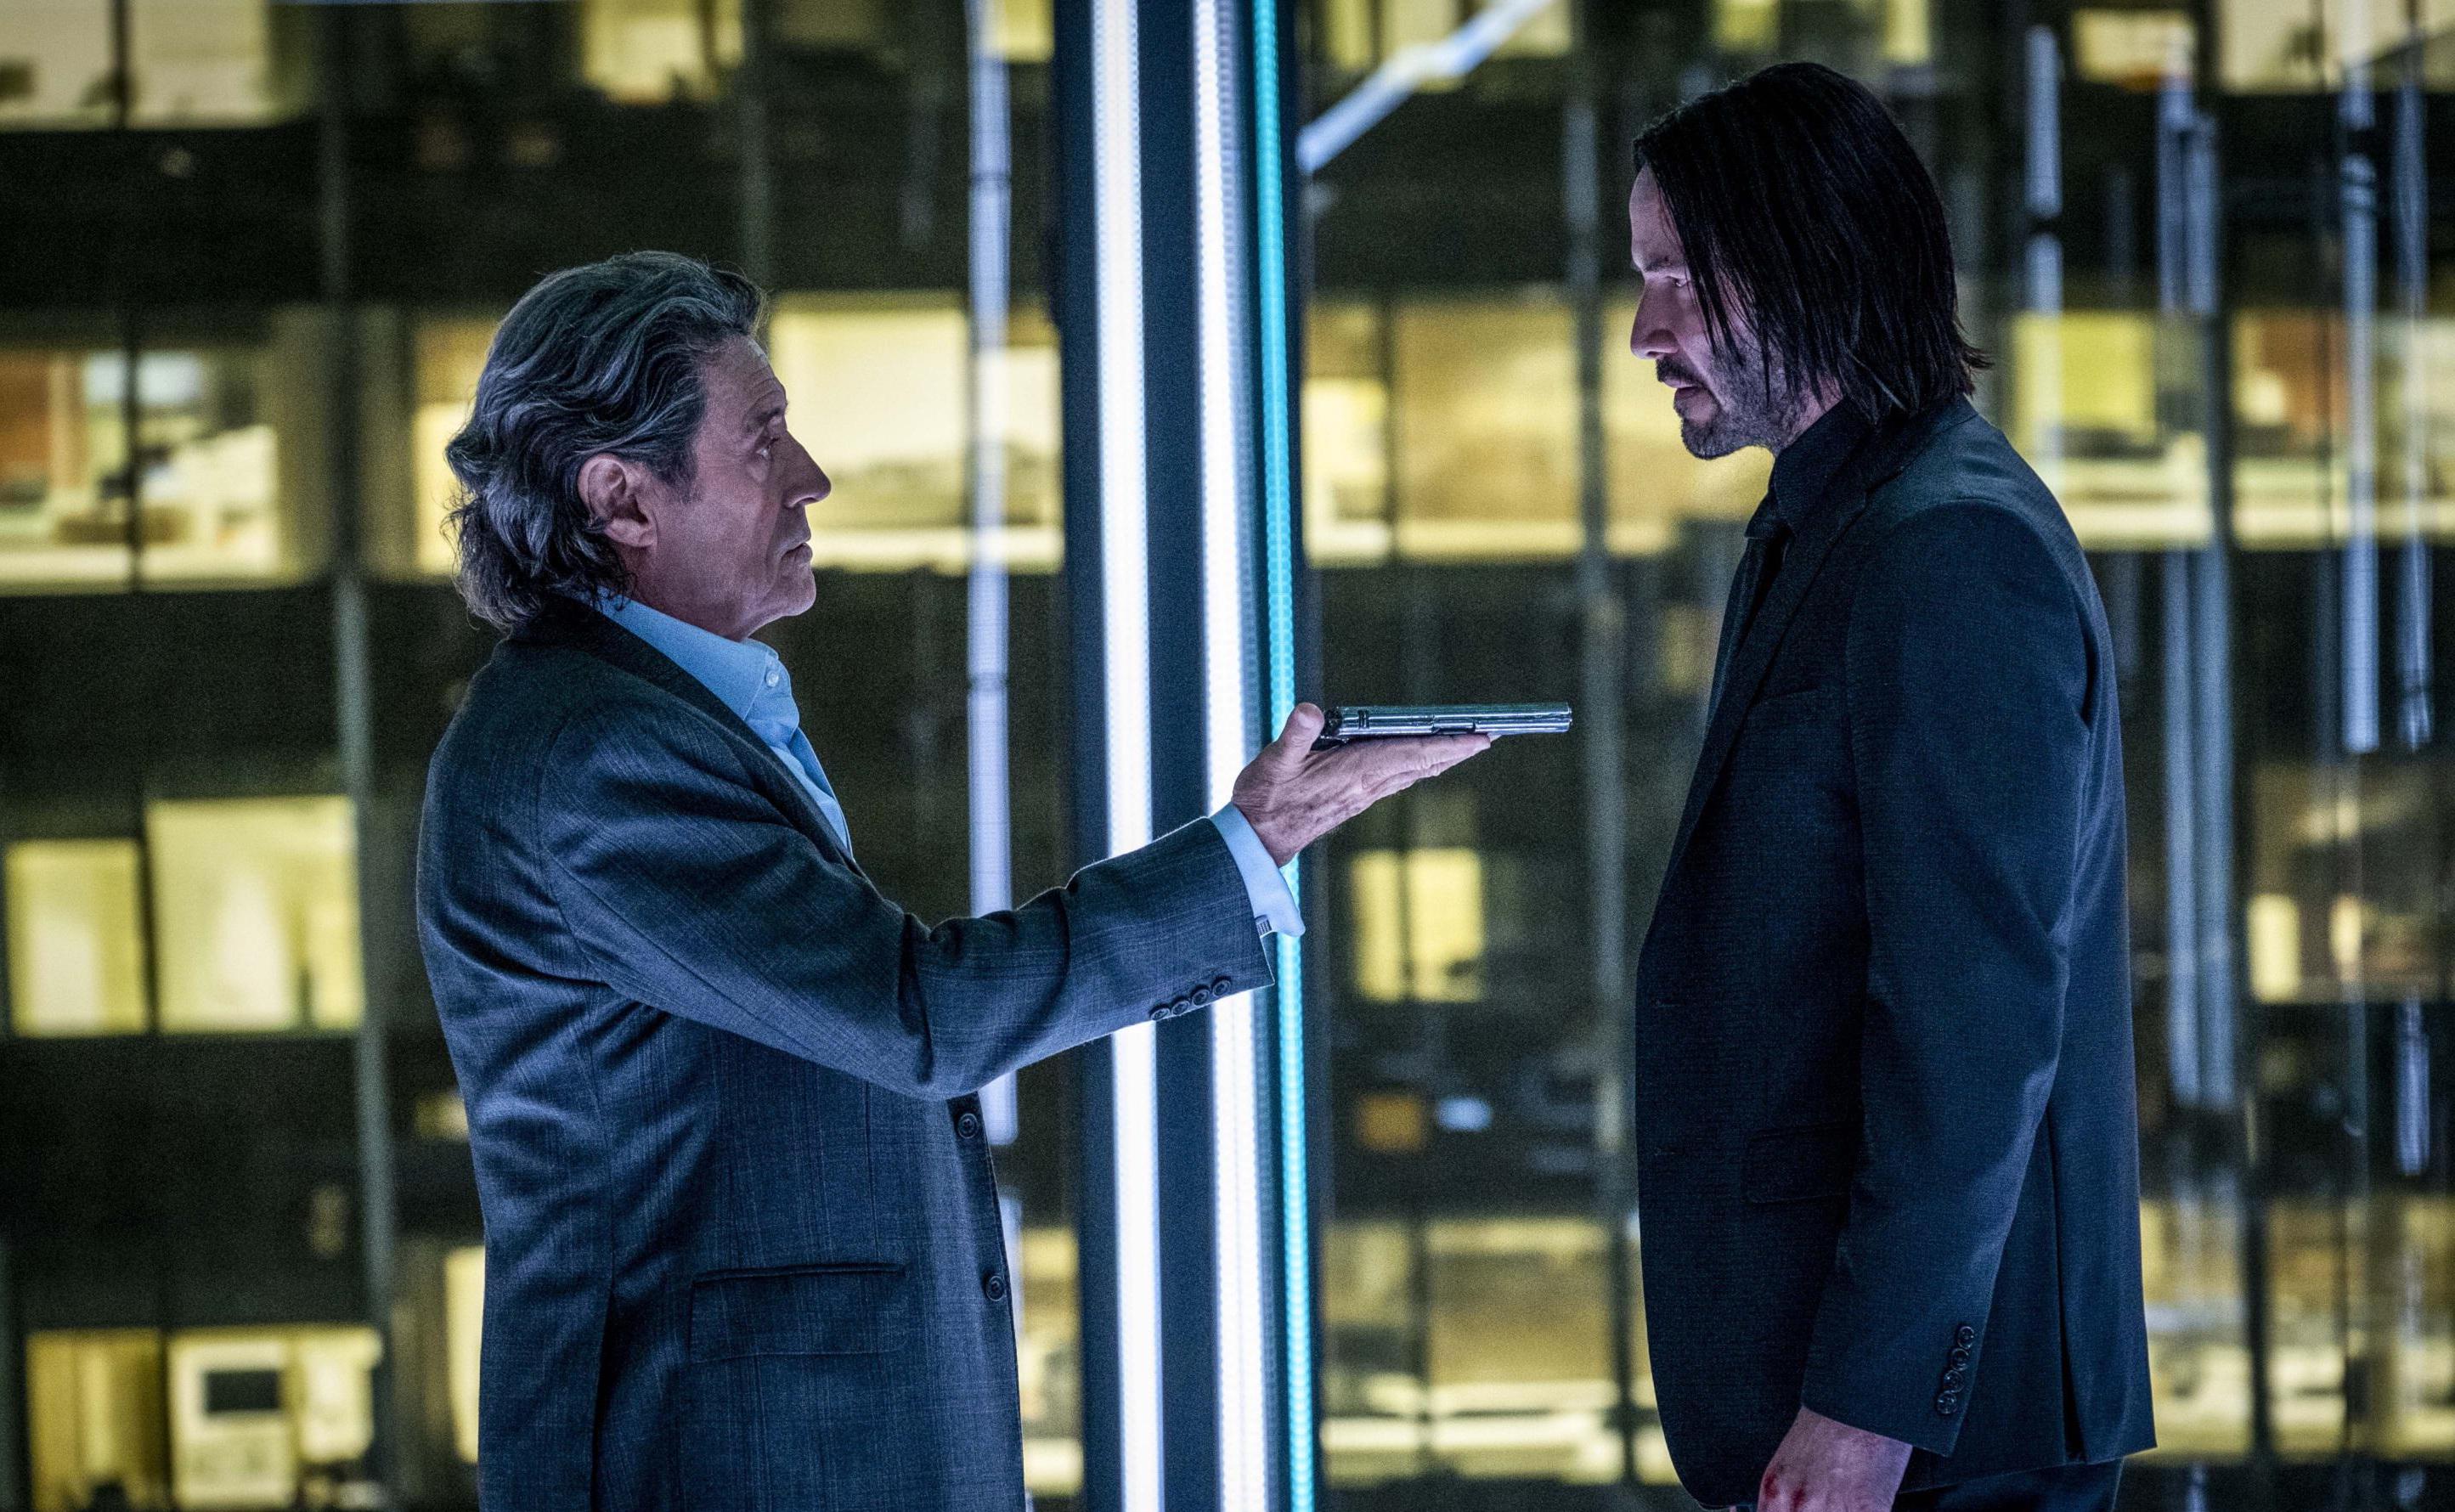 ‘John Wick’ Star Provides Promising Update On When The Next Movies Will ...